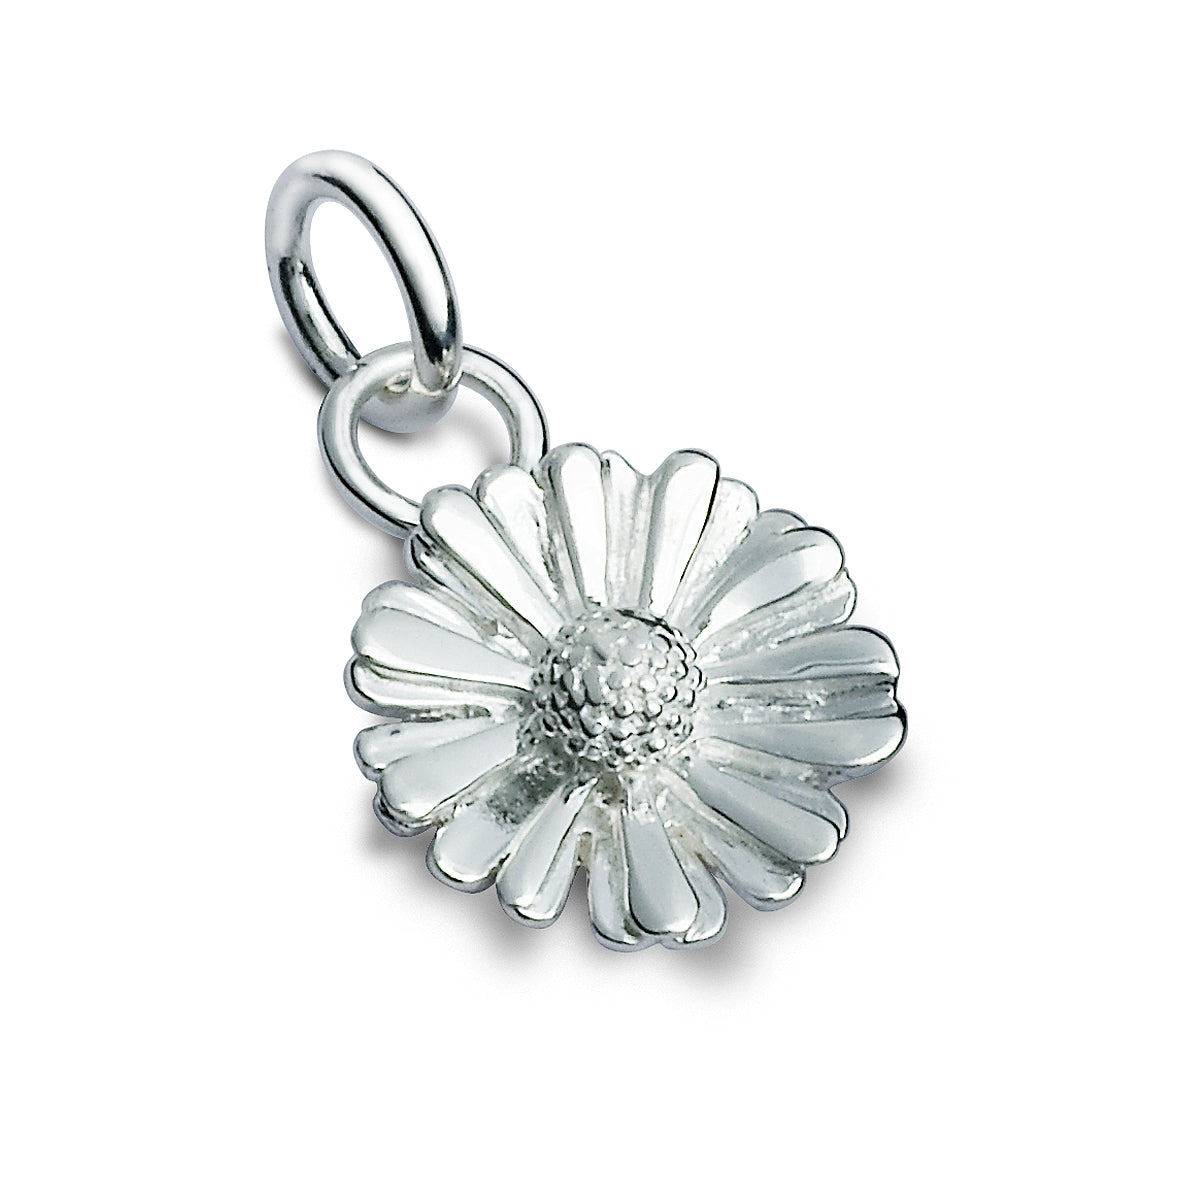 Silver Daisy Charm For Bracelet or Necklace